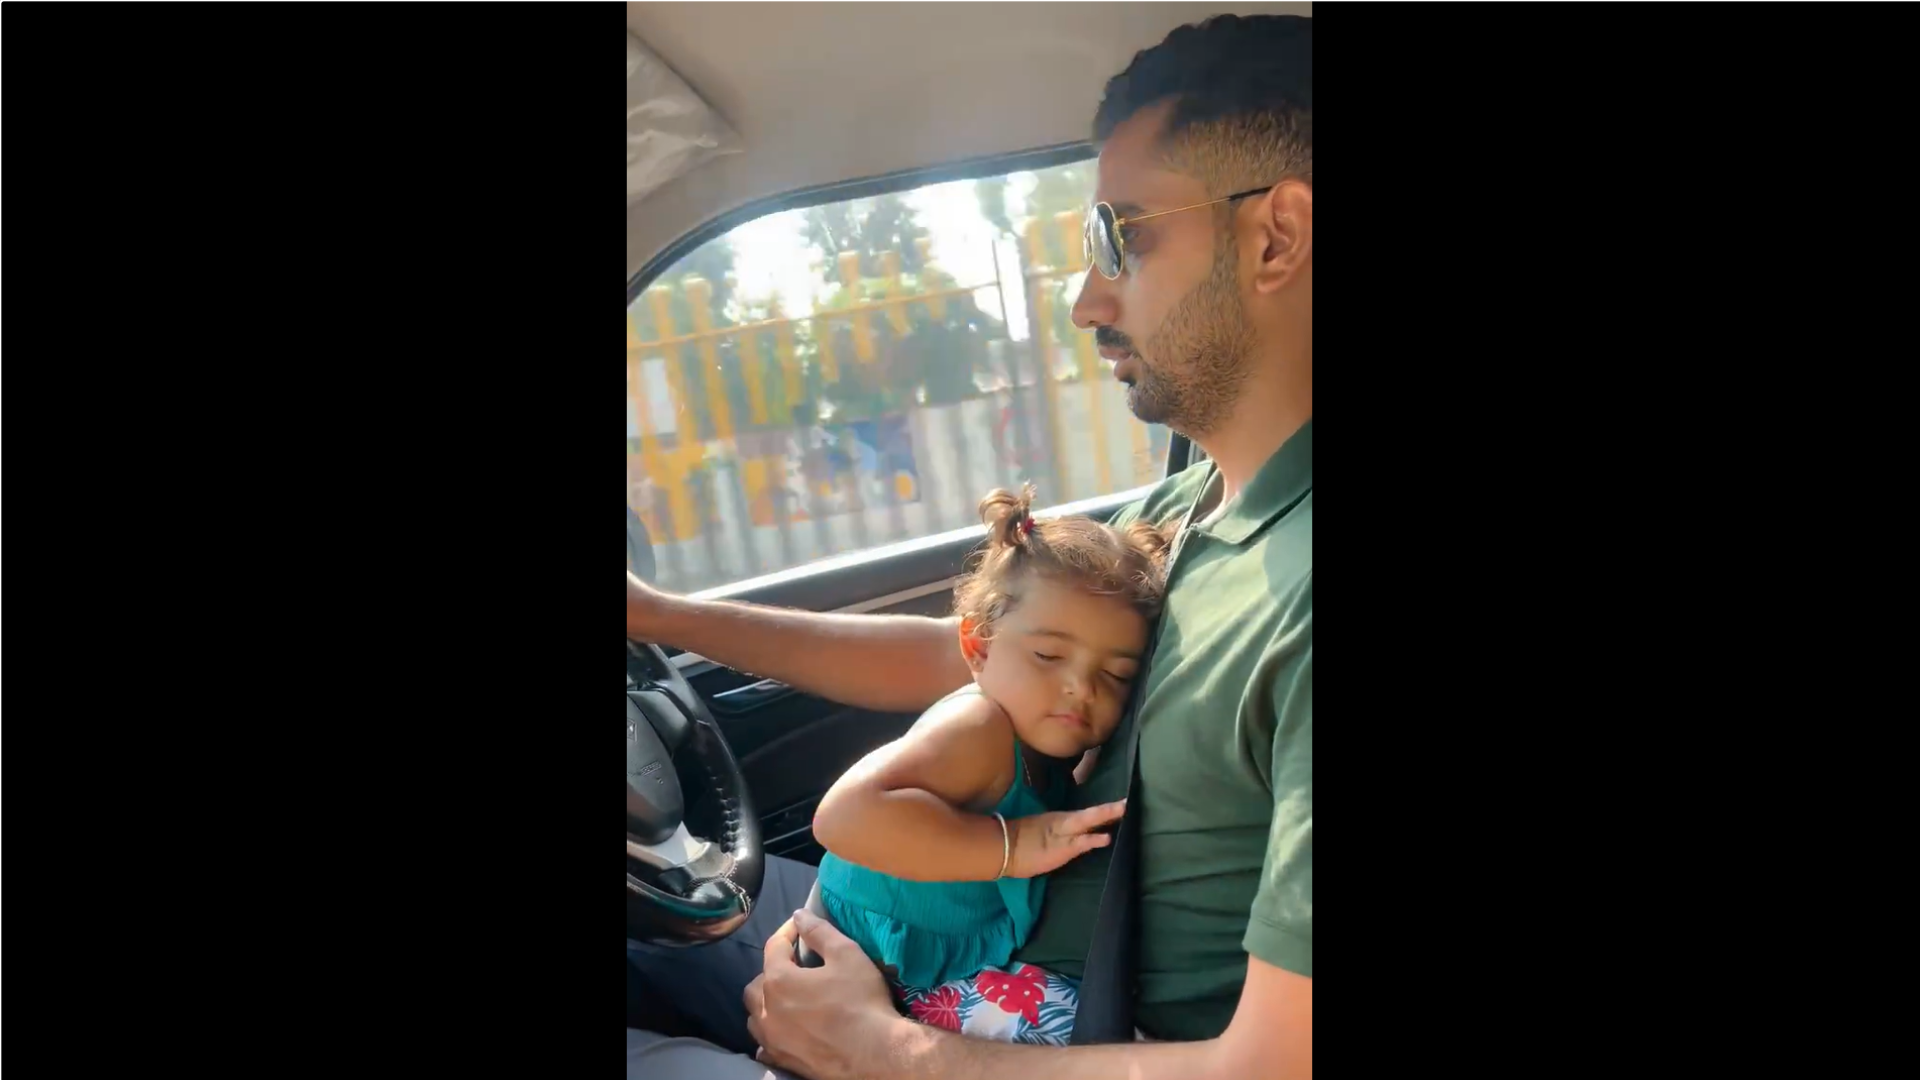 Watch: Viral Video of Man Driving with Daughter on Lap Sparks Safety Concerns